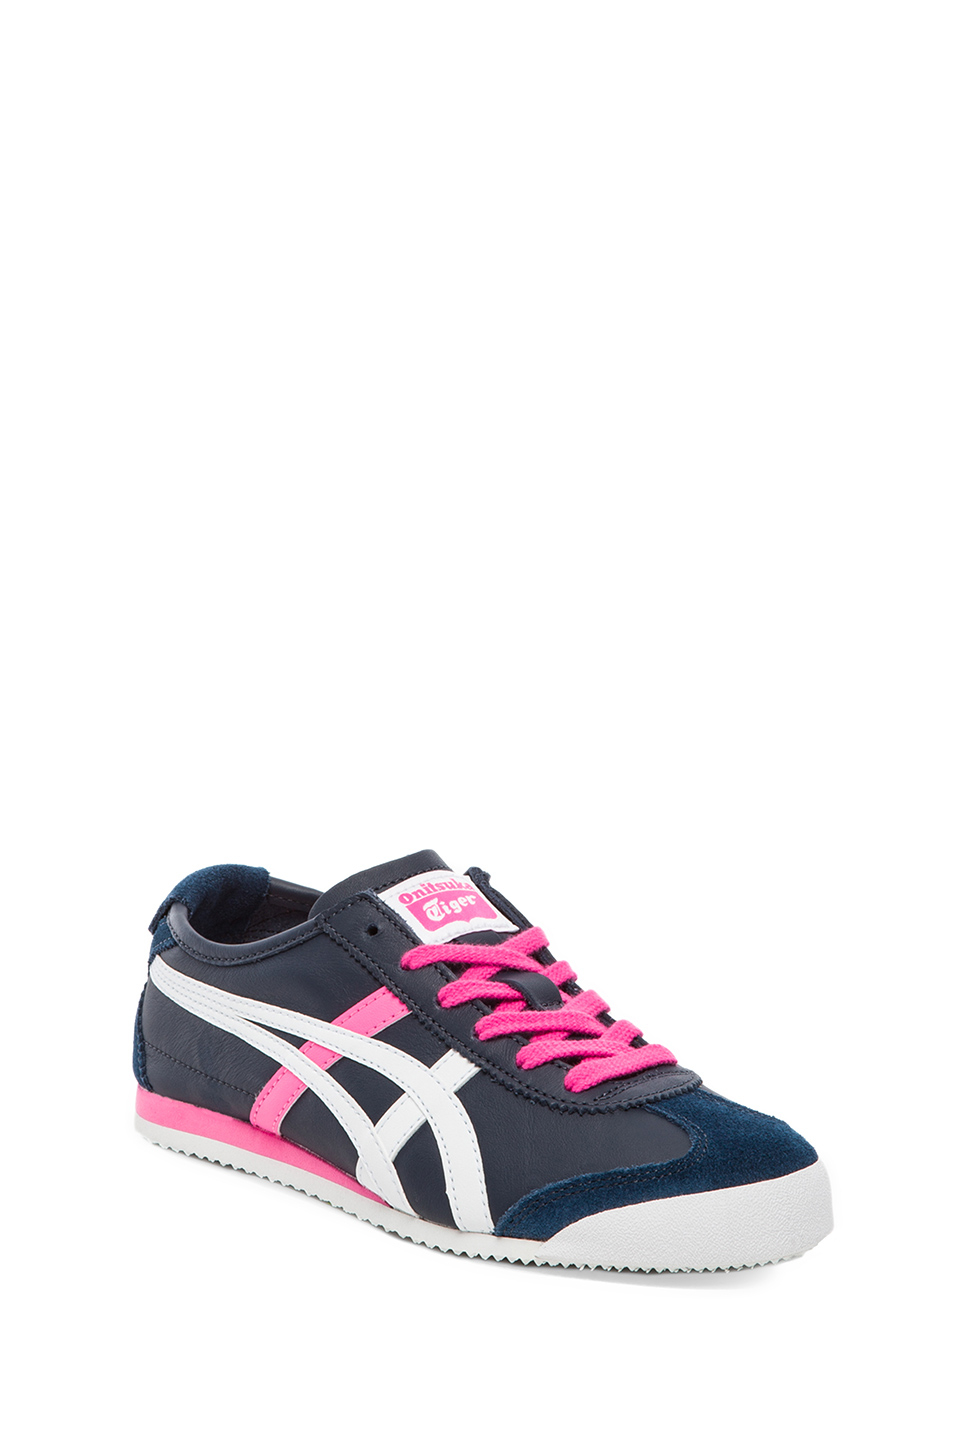 Lyst - Onitsuka Tiger Mexico 66 Sneaker